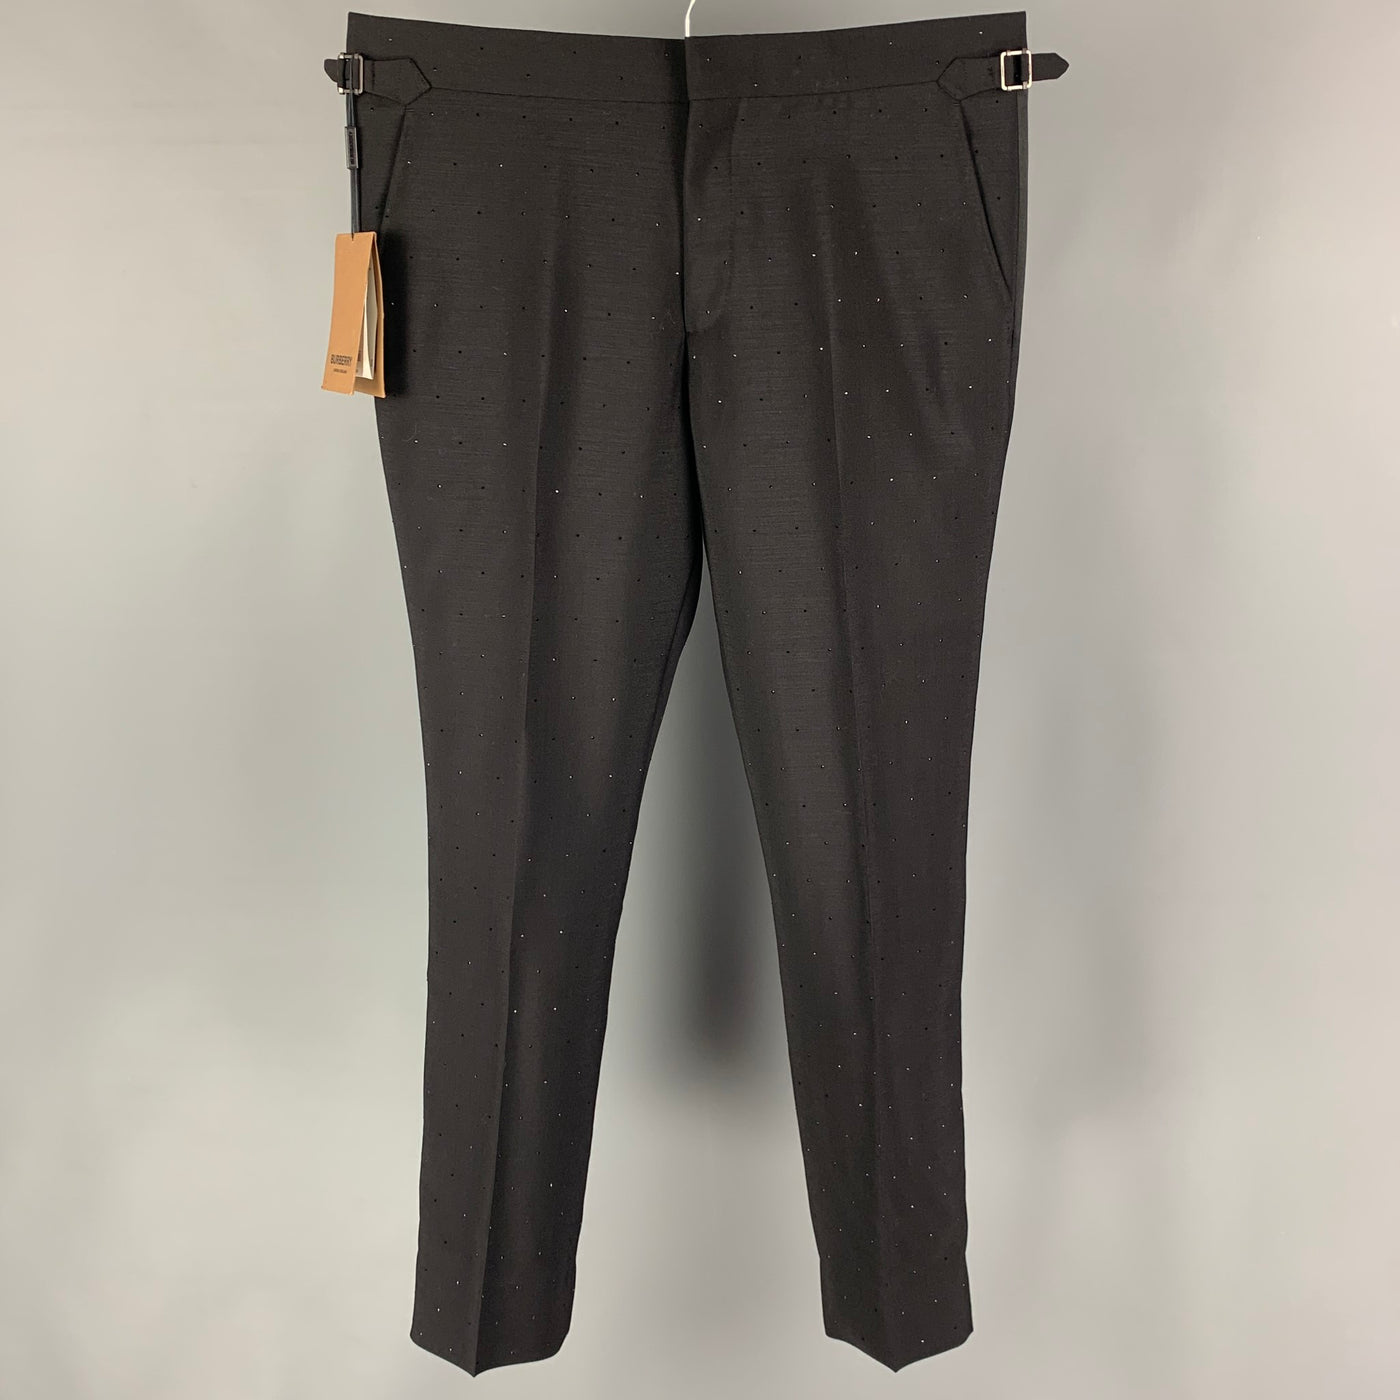 BURBERRY cotton trousers  Black  Burberry pants 8065086 online on  GIGLIOCOM